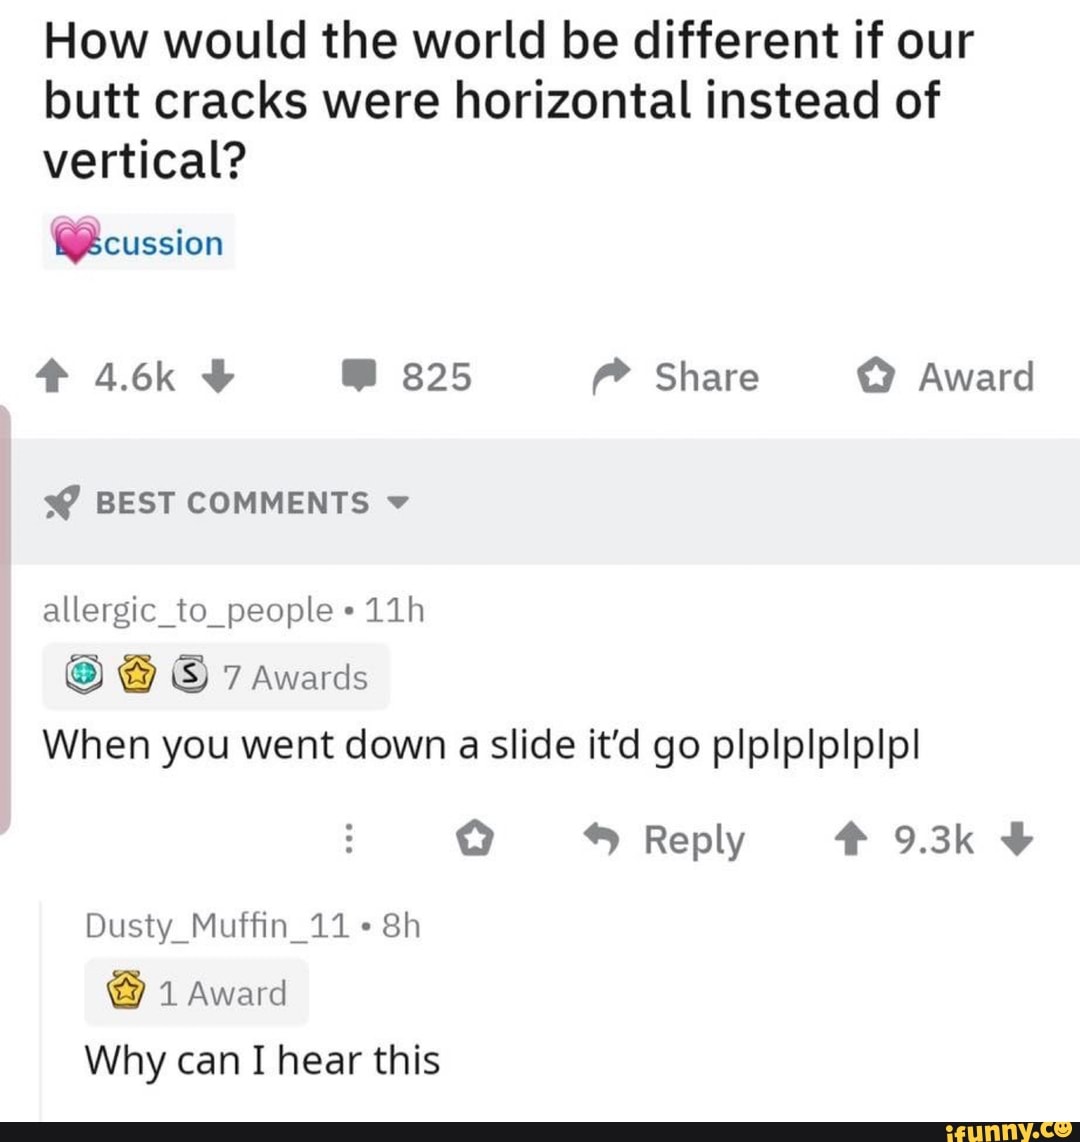 How would the world be different if our butt cracks were horizontal ...